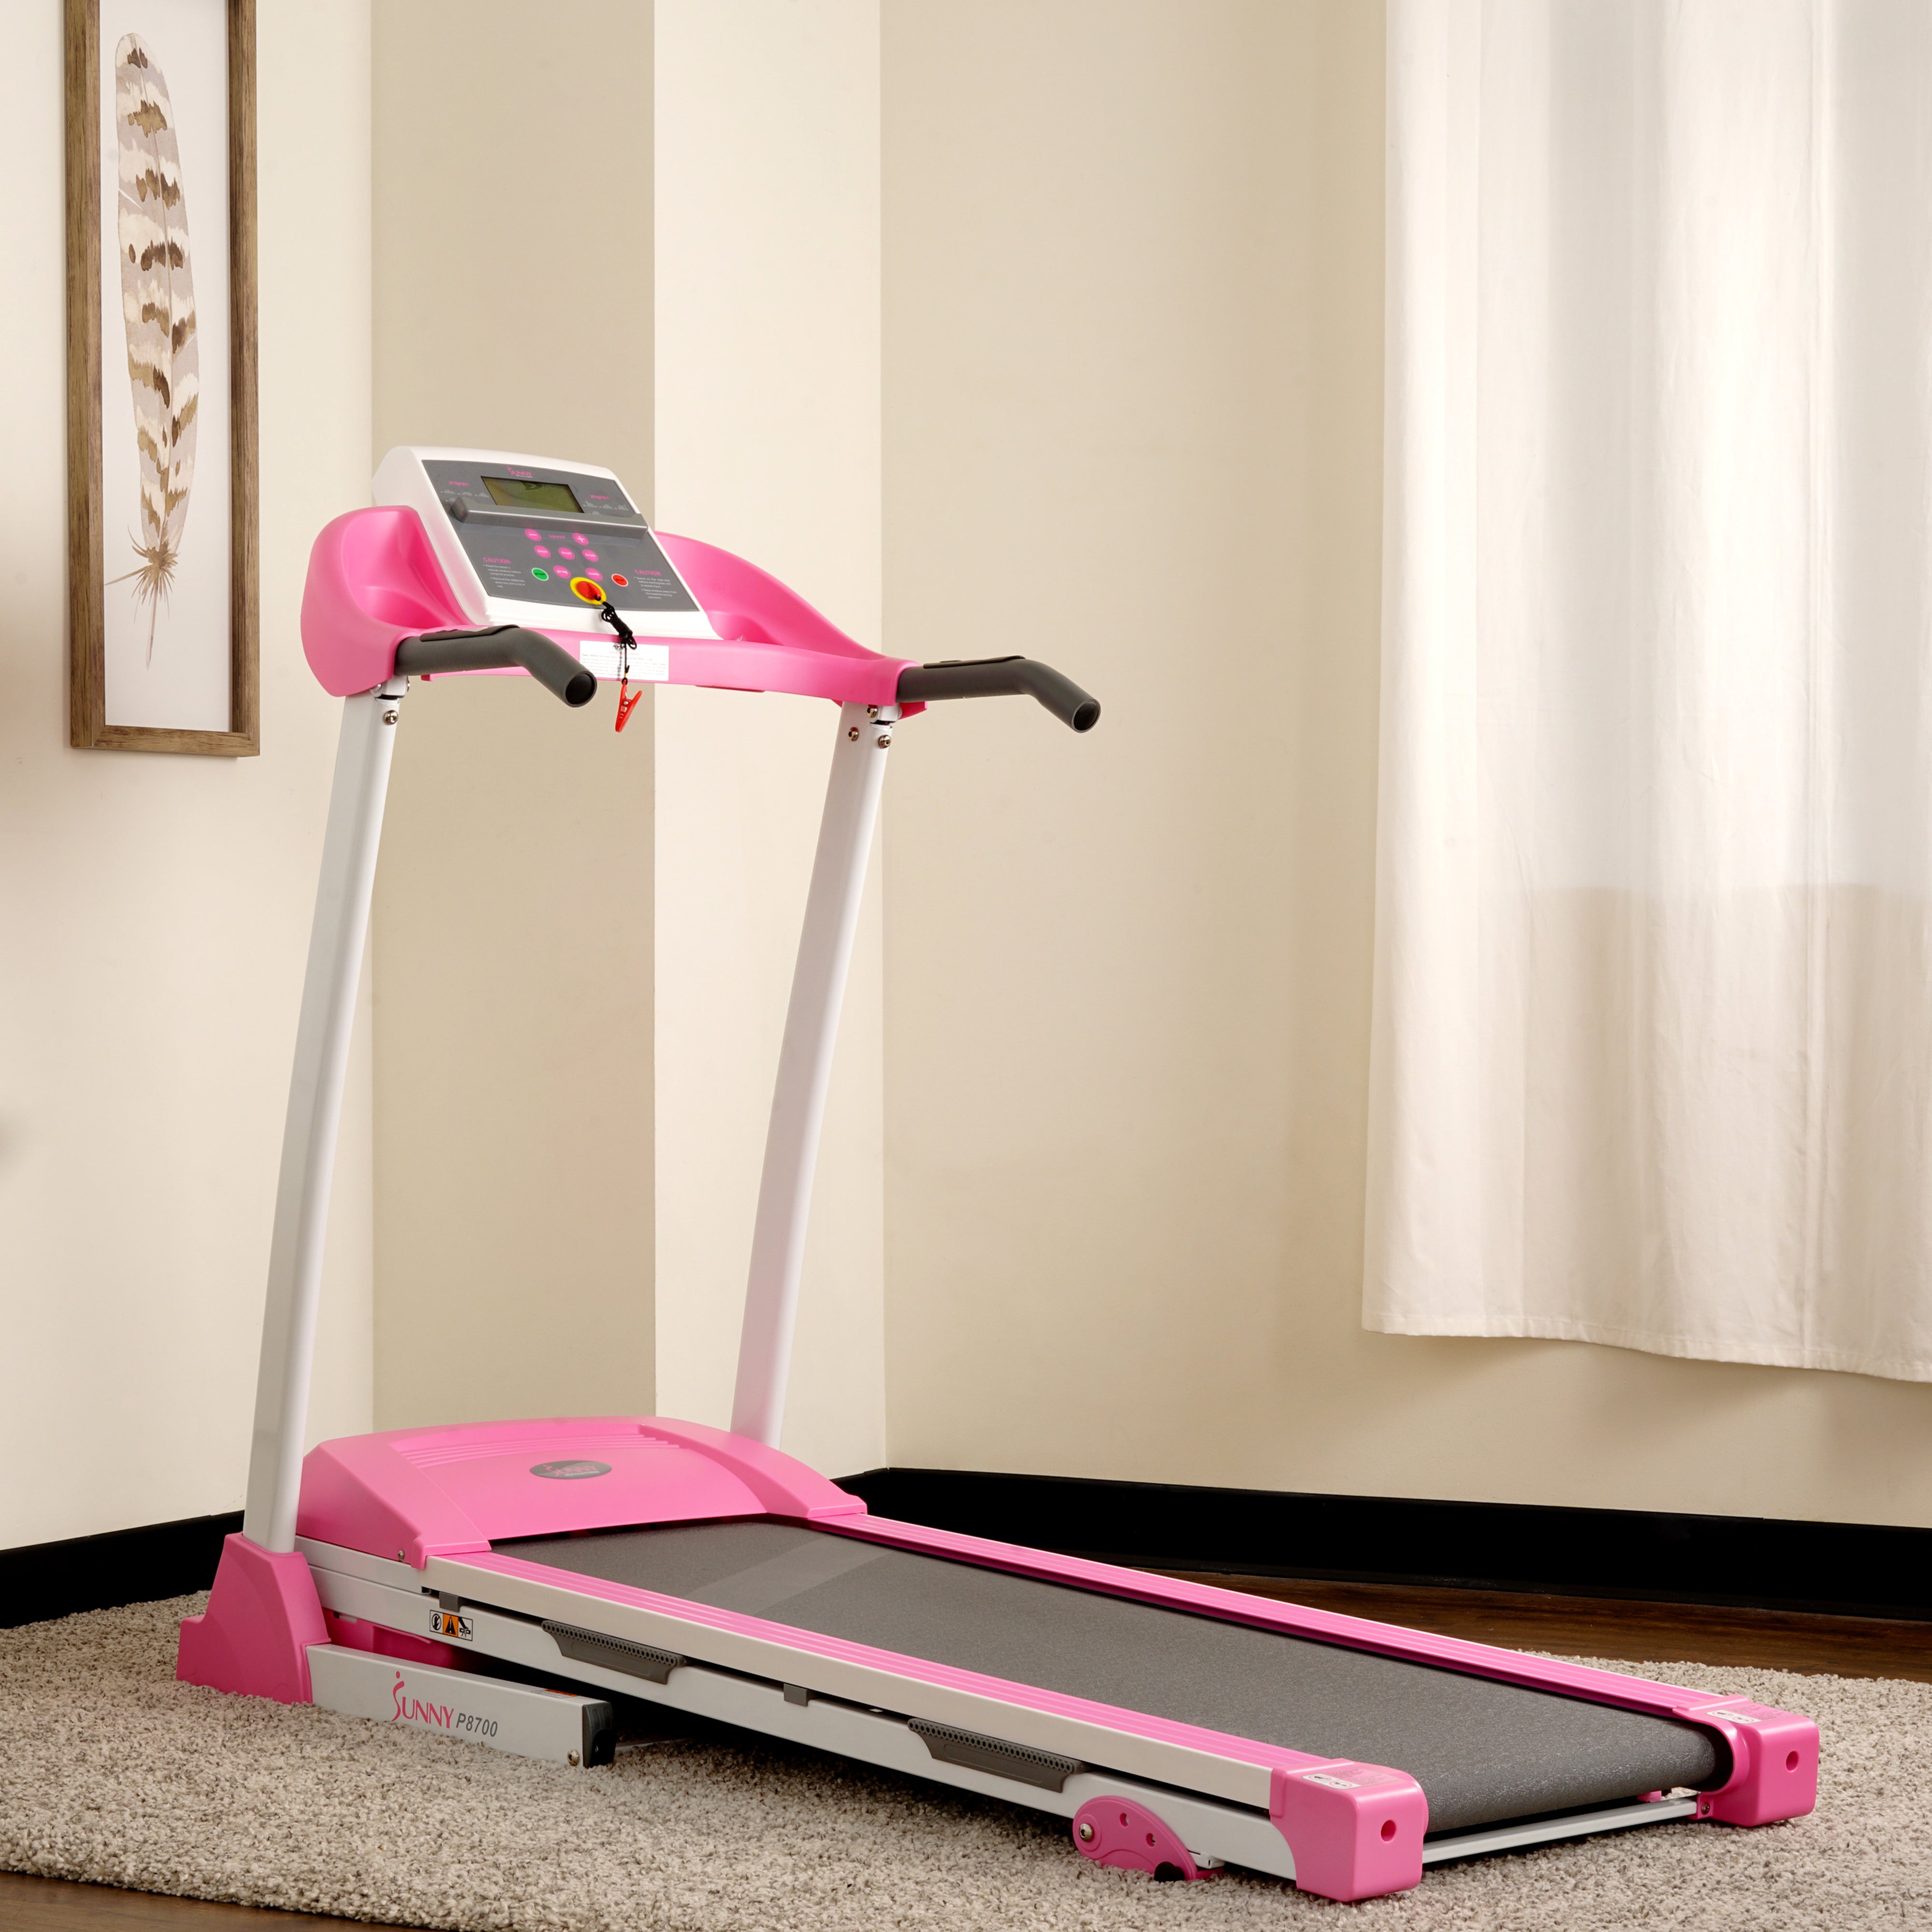 Pink Treadmill w/ Manual Incline and LCD Display